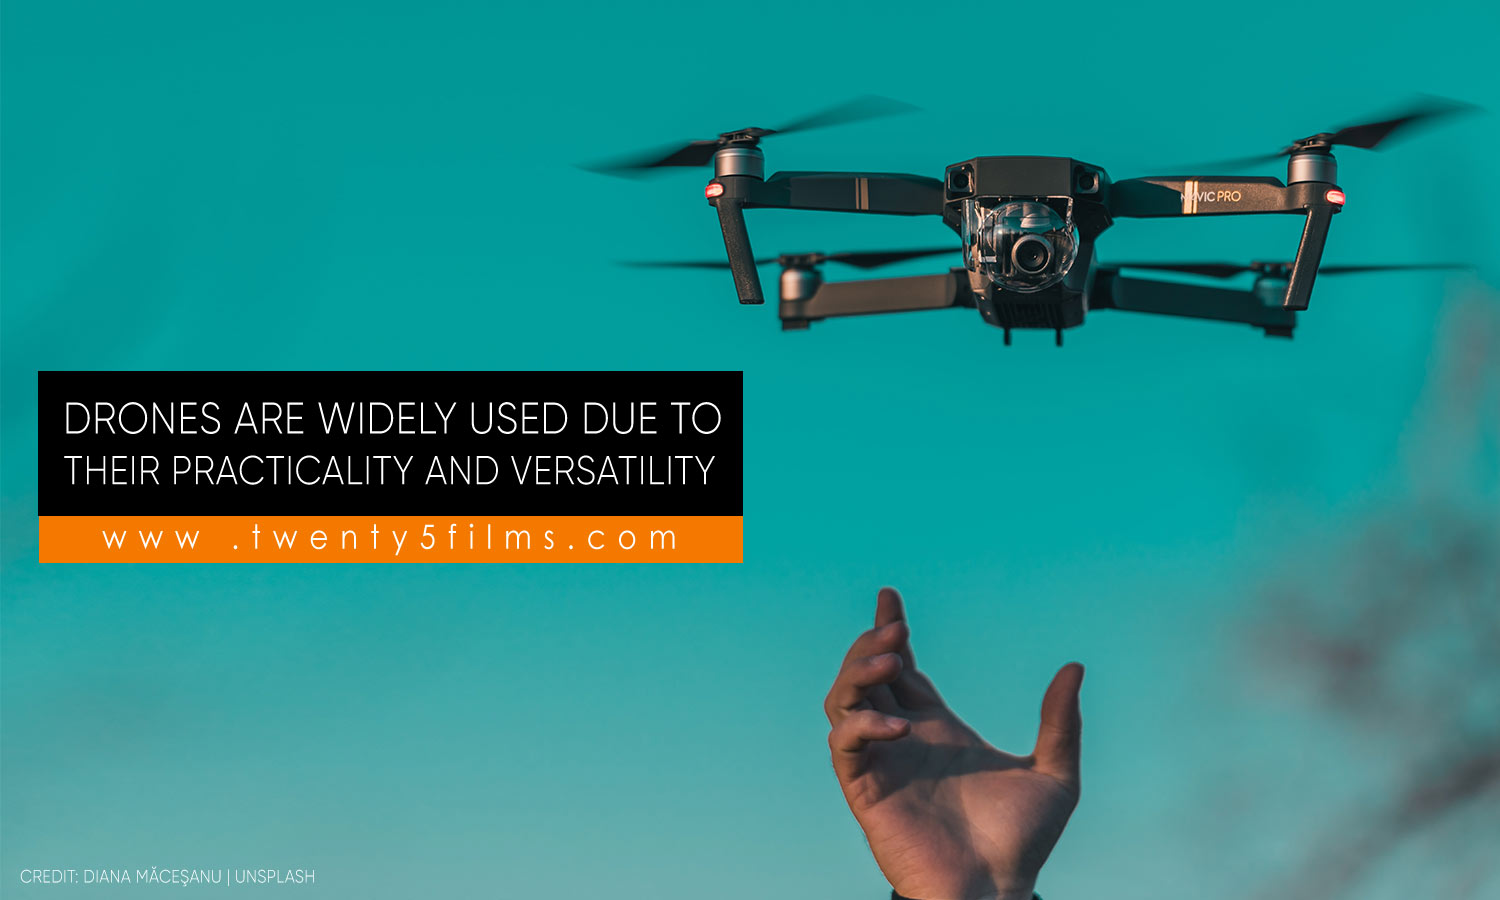 Drones are widely used due to their practicality and versatility